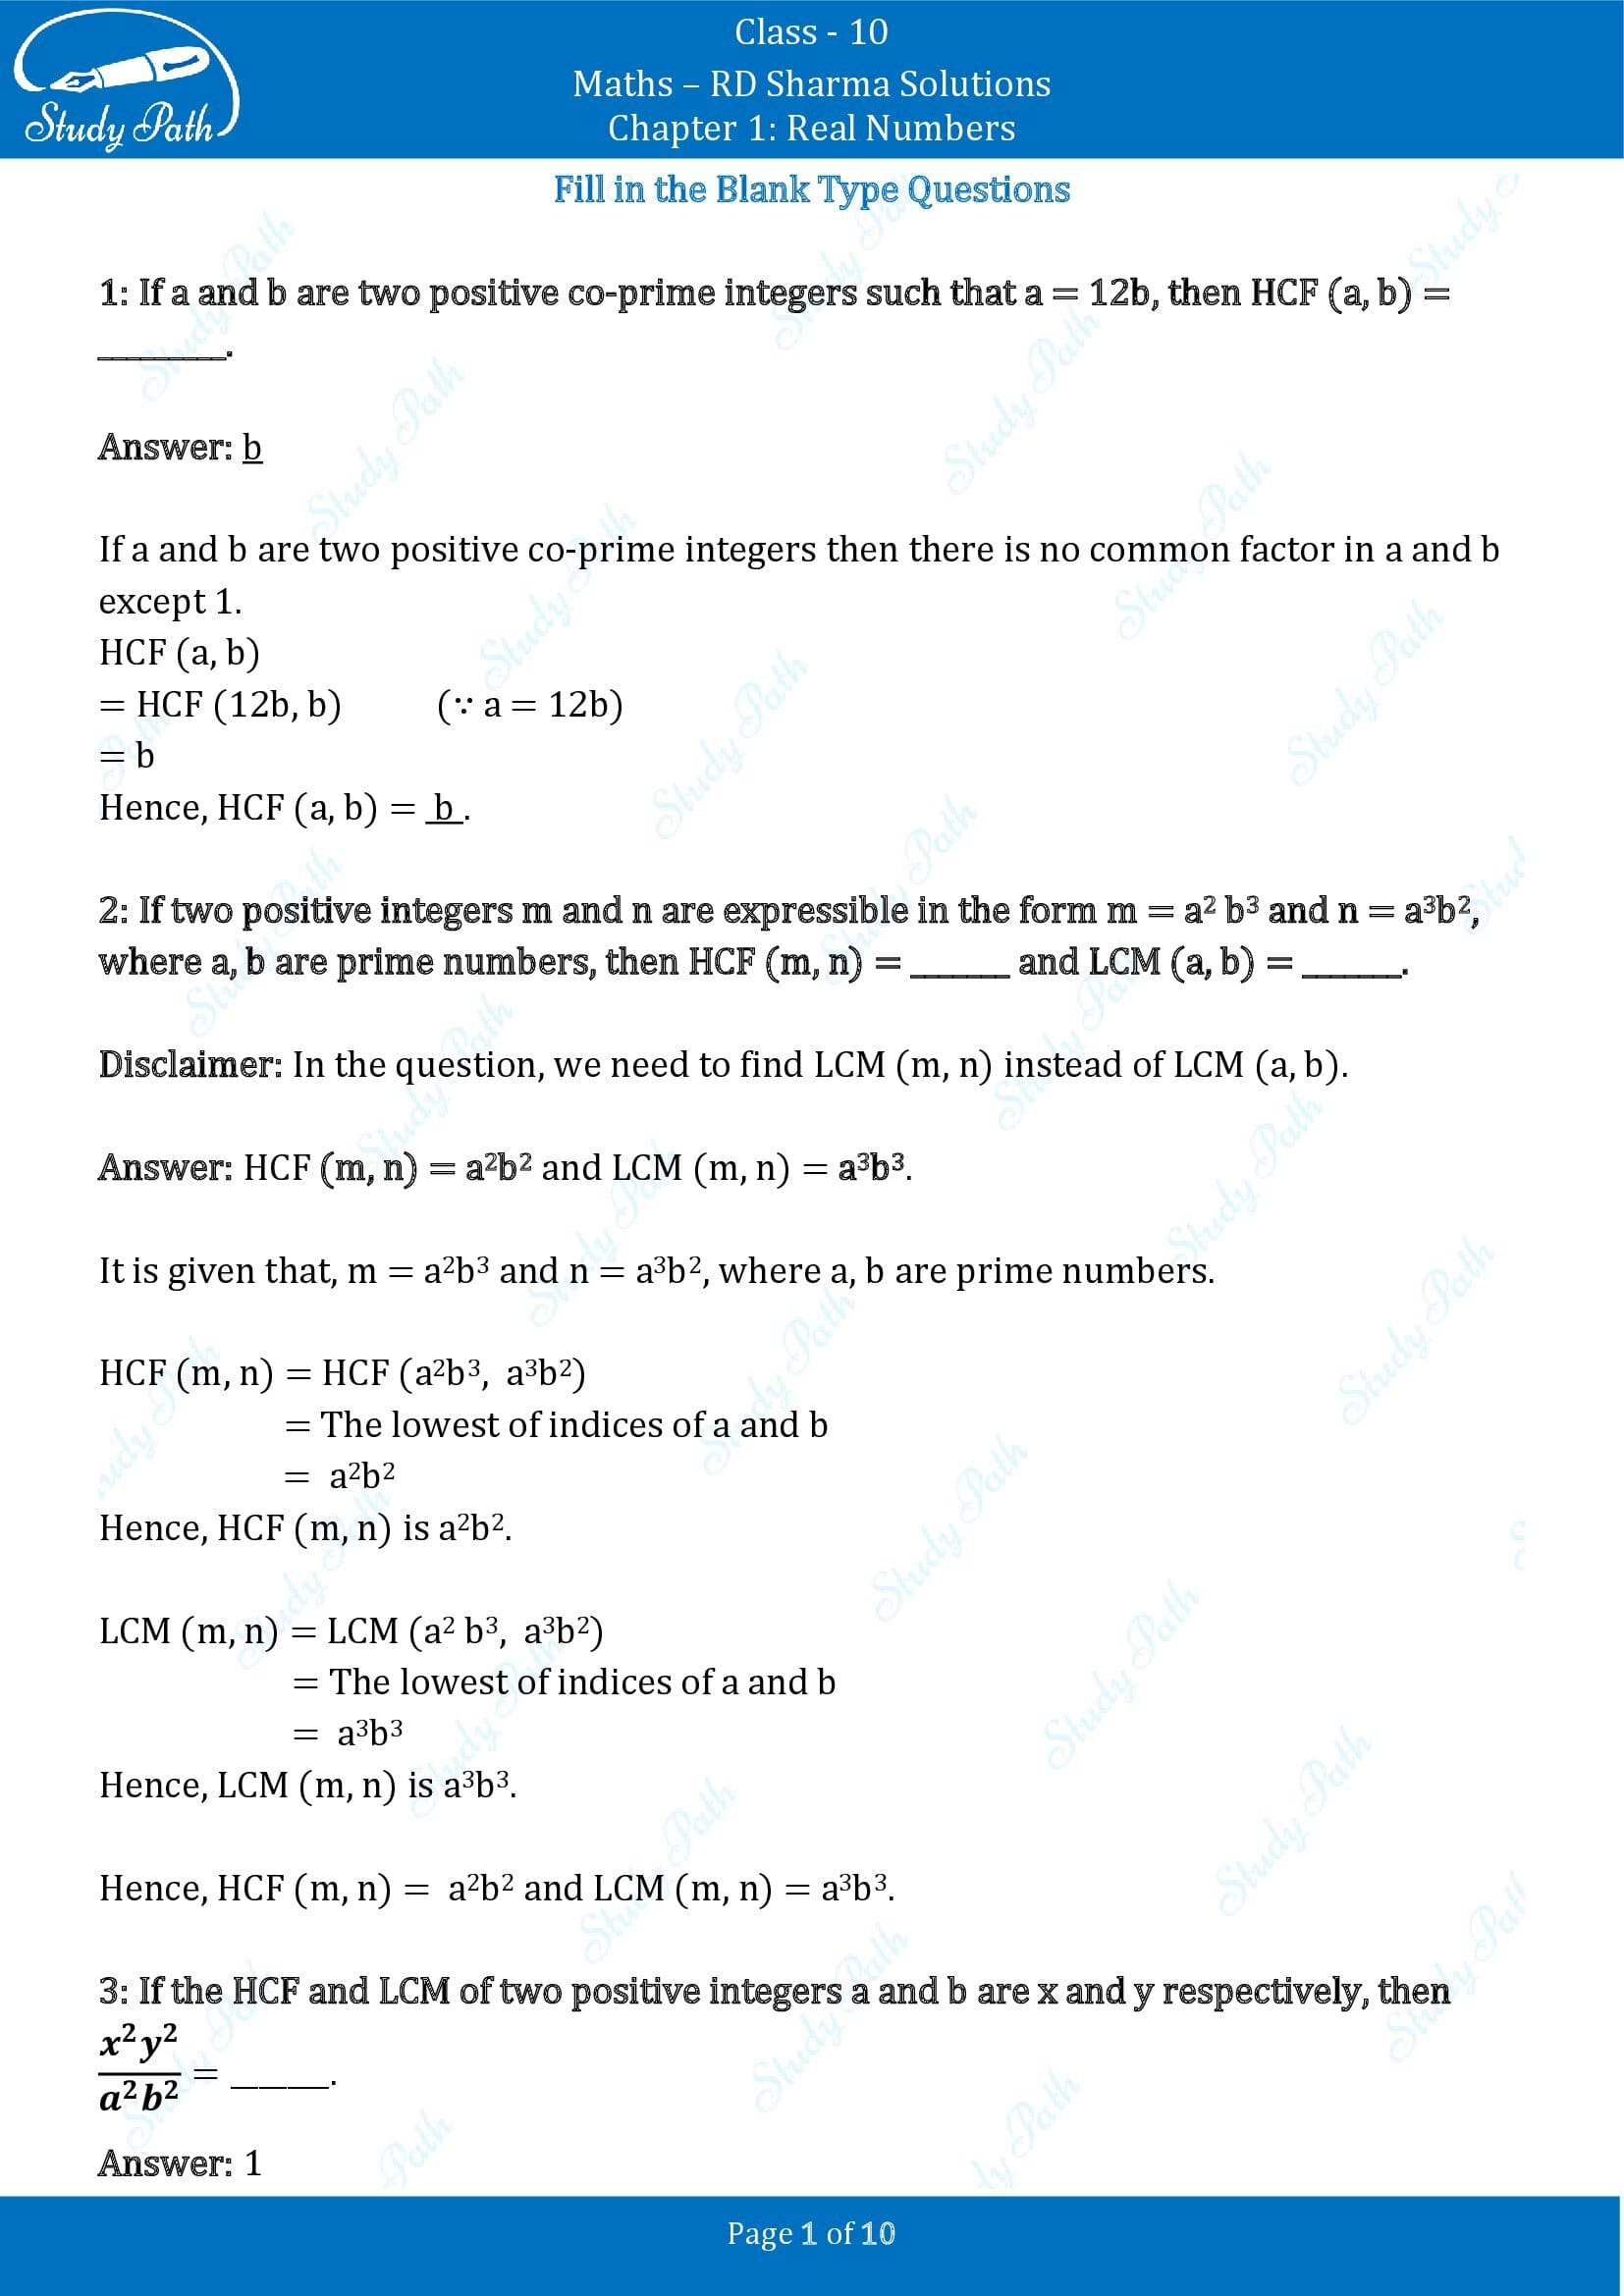 RD Sharma Solutions Class 10 Chapter 1 Real Numbers Fill in the Blank Type Questions FBQs 00001